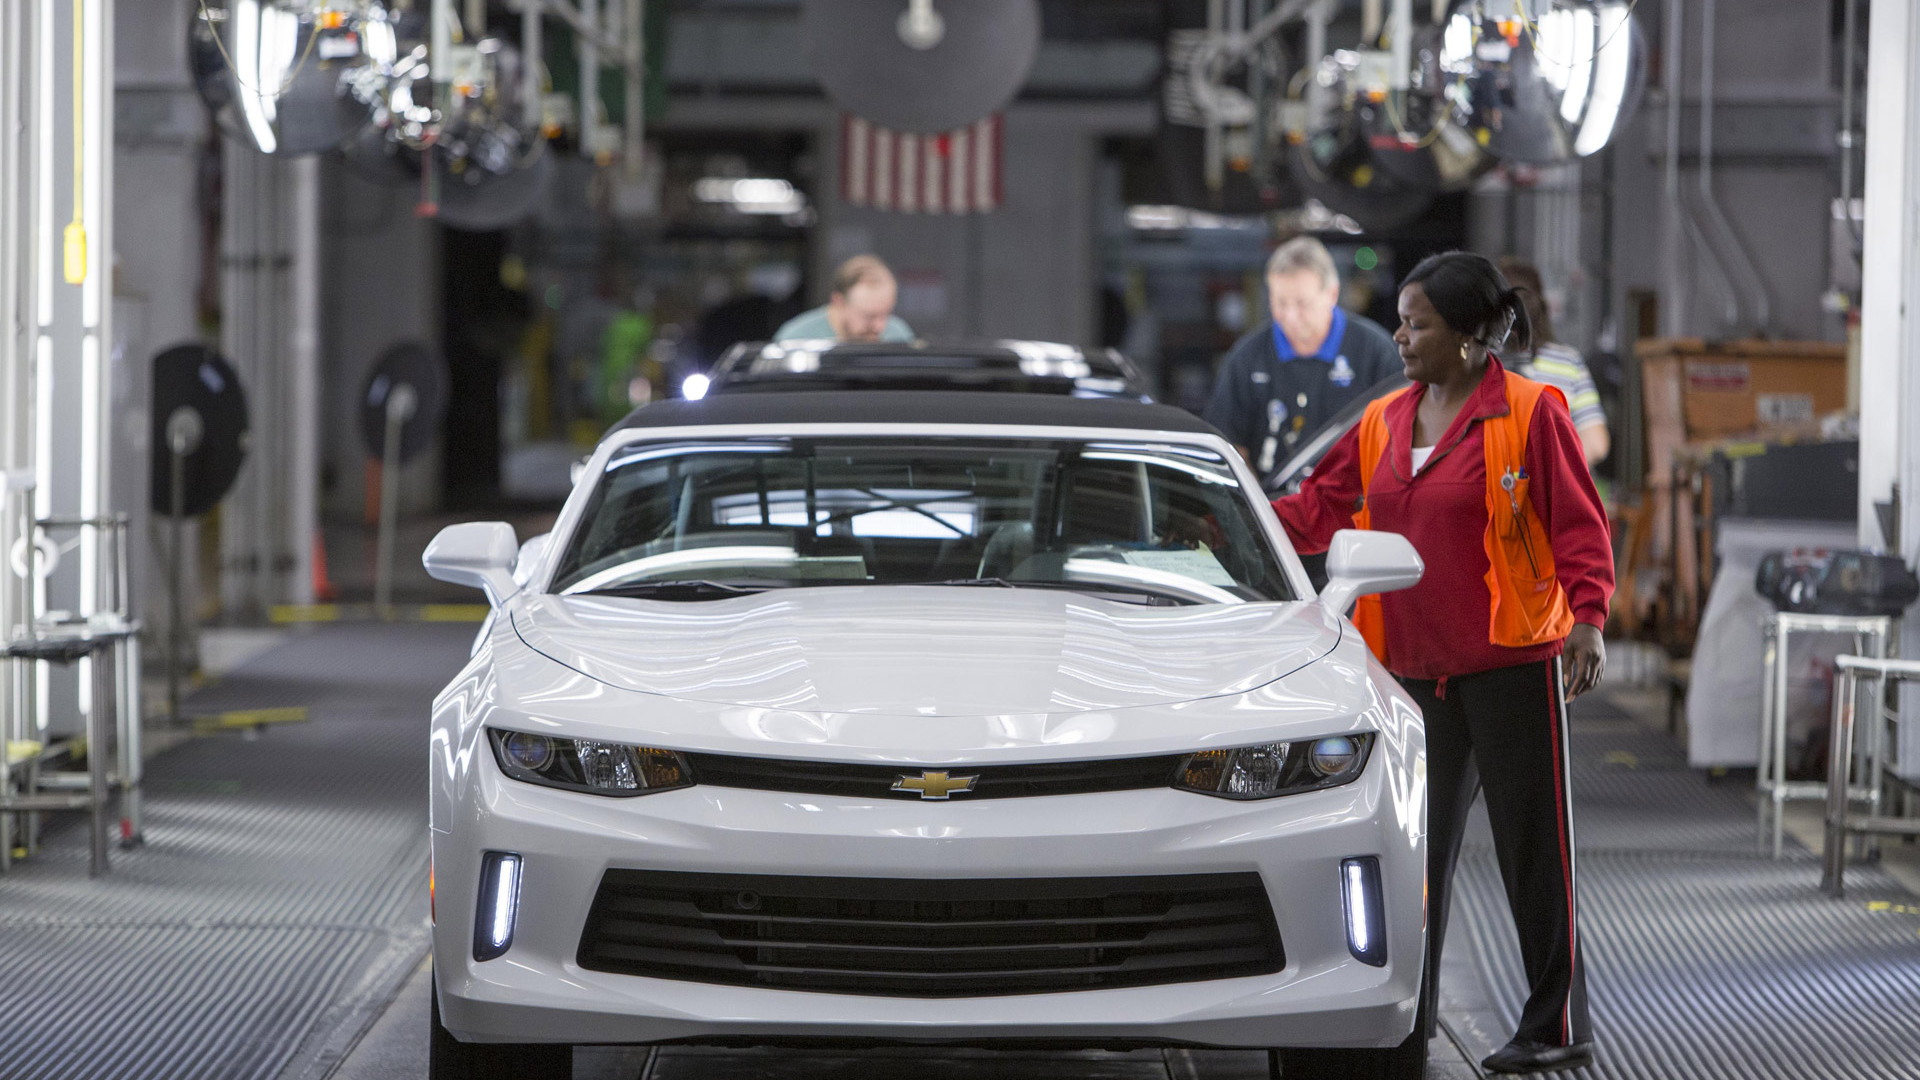 First batch of 2016 Chevrolet Camaros en route to dealers